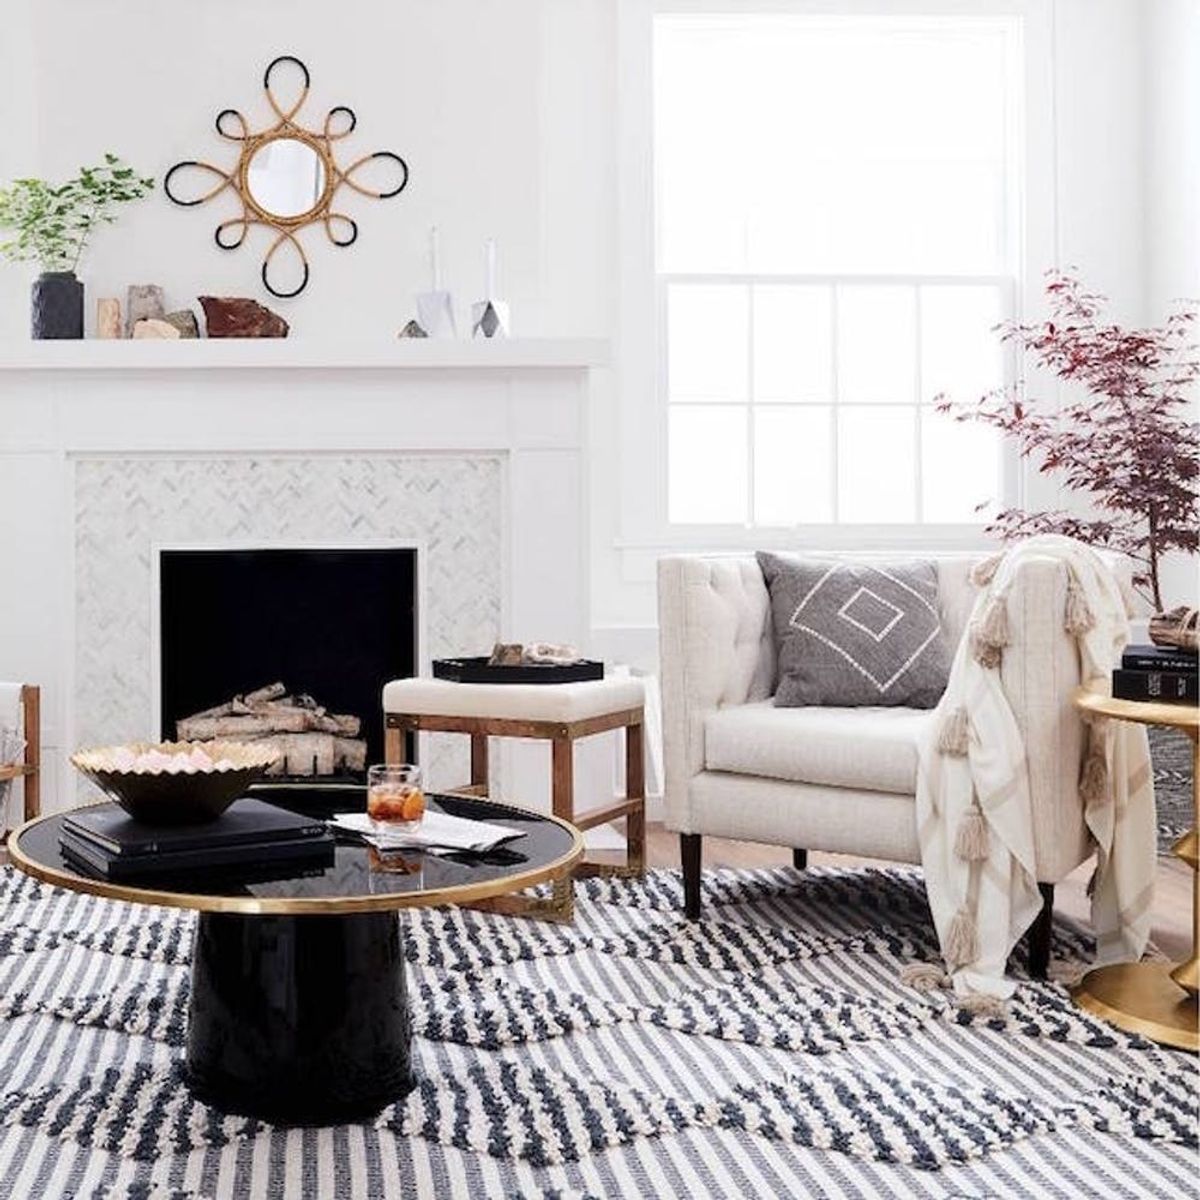 The New Nate Berkus Target Collection Is Totally Fall-Tastic